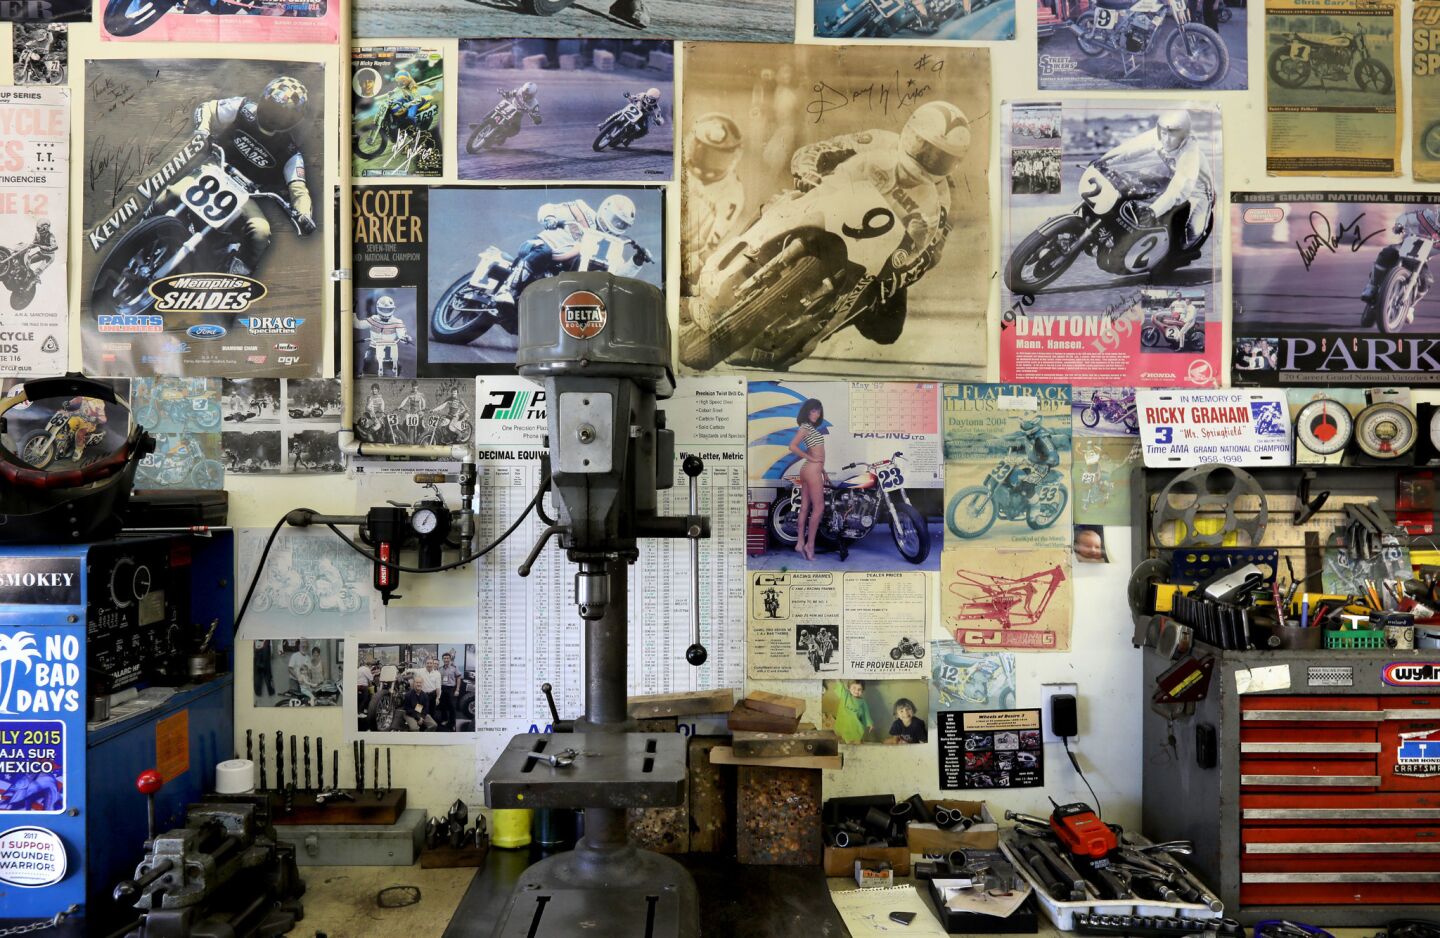 View of a wall in the garage workshop of motorcycle frame builder Jeff Cole showing a drill press, tool box and photos and posters of prominent motorcycle racers from the past on bikes he designed.